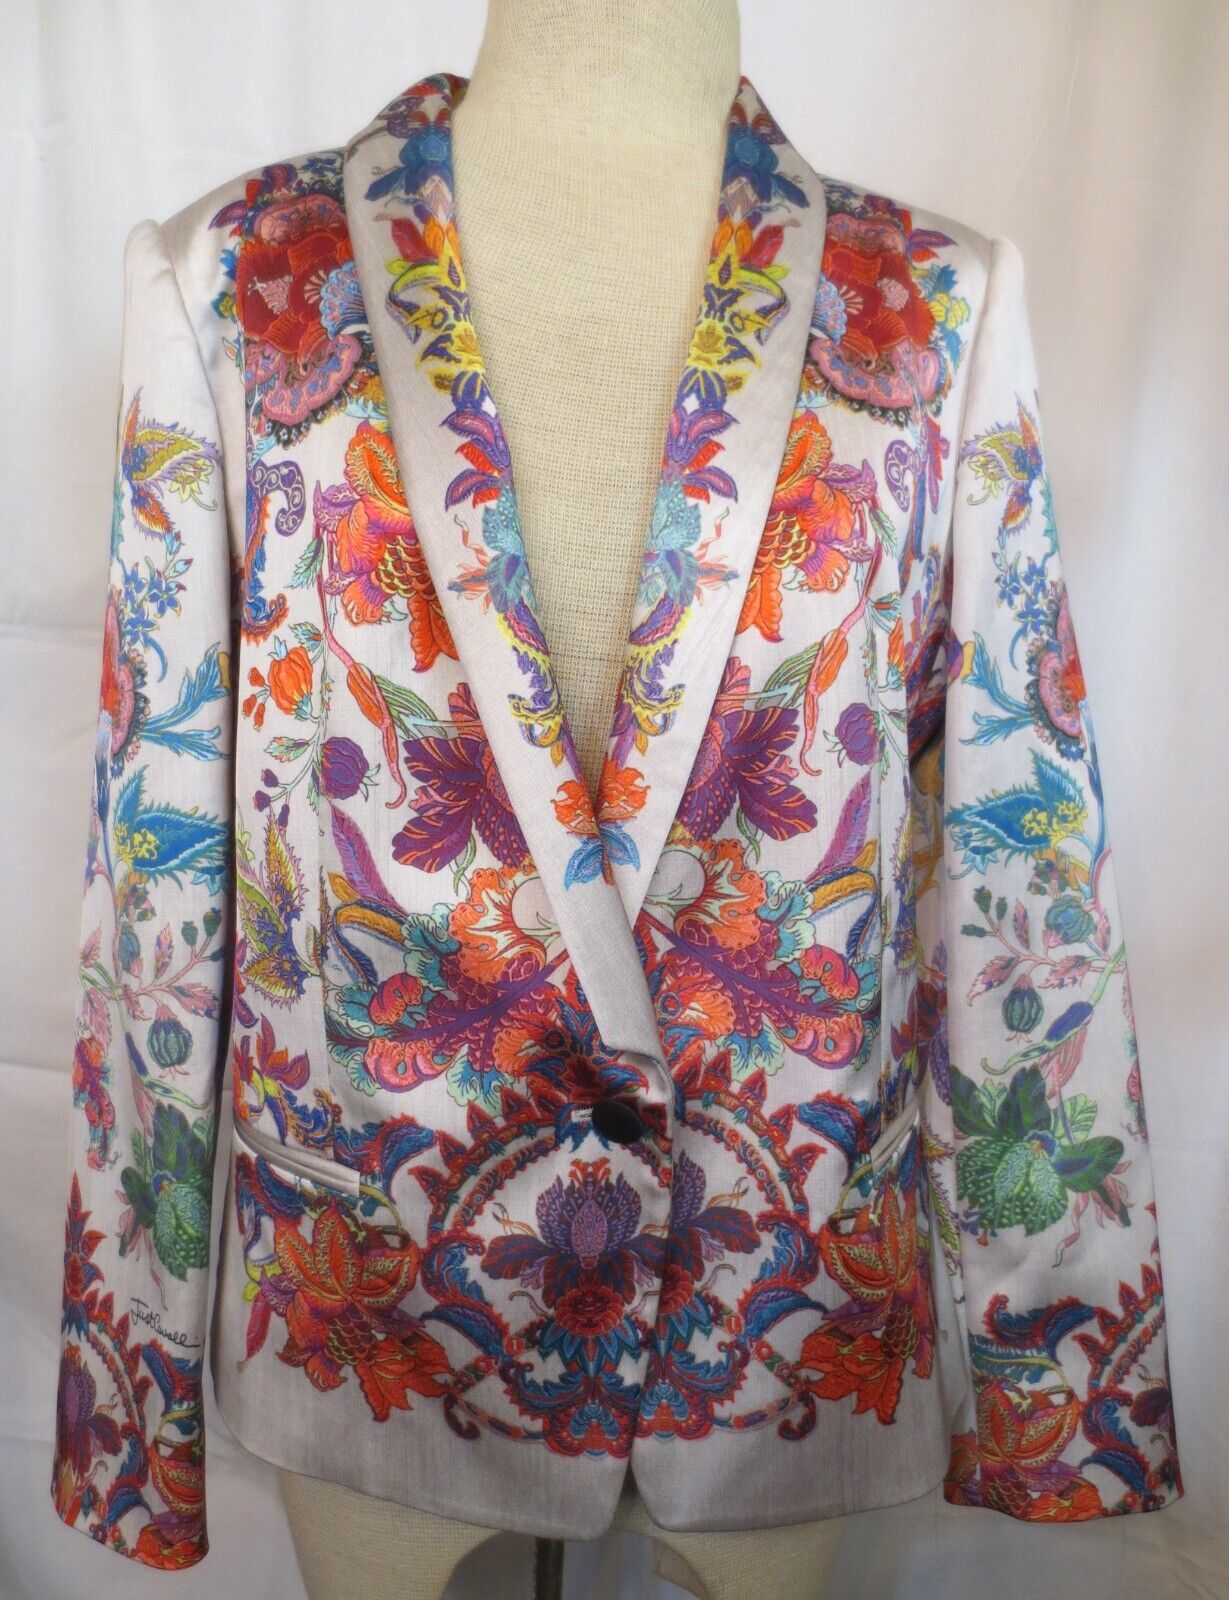 Primary image for Just Roberto Cavalli Gorgeous Floral Jacket Colorful Design Size 46 US 36